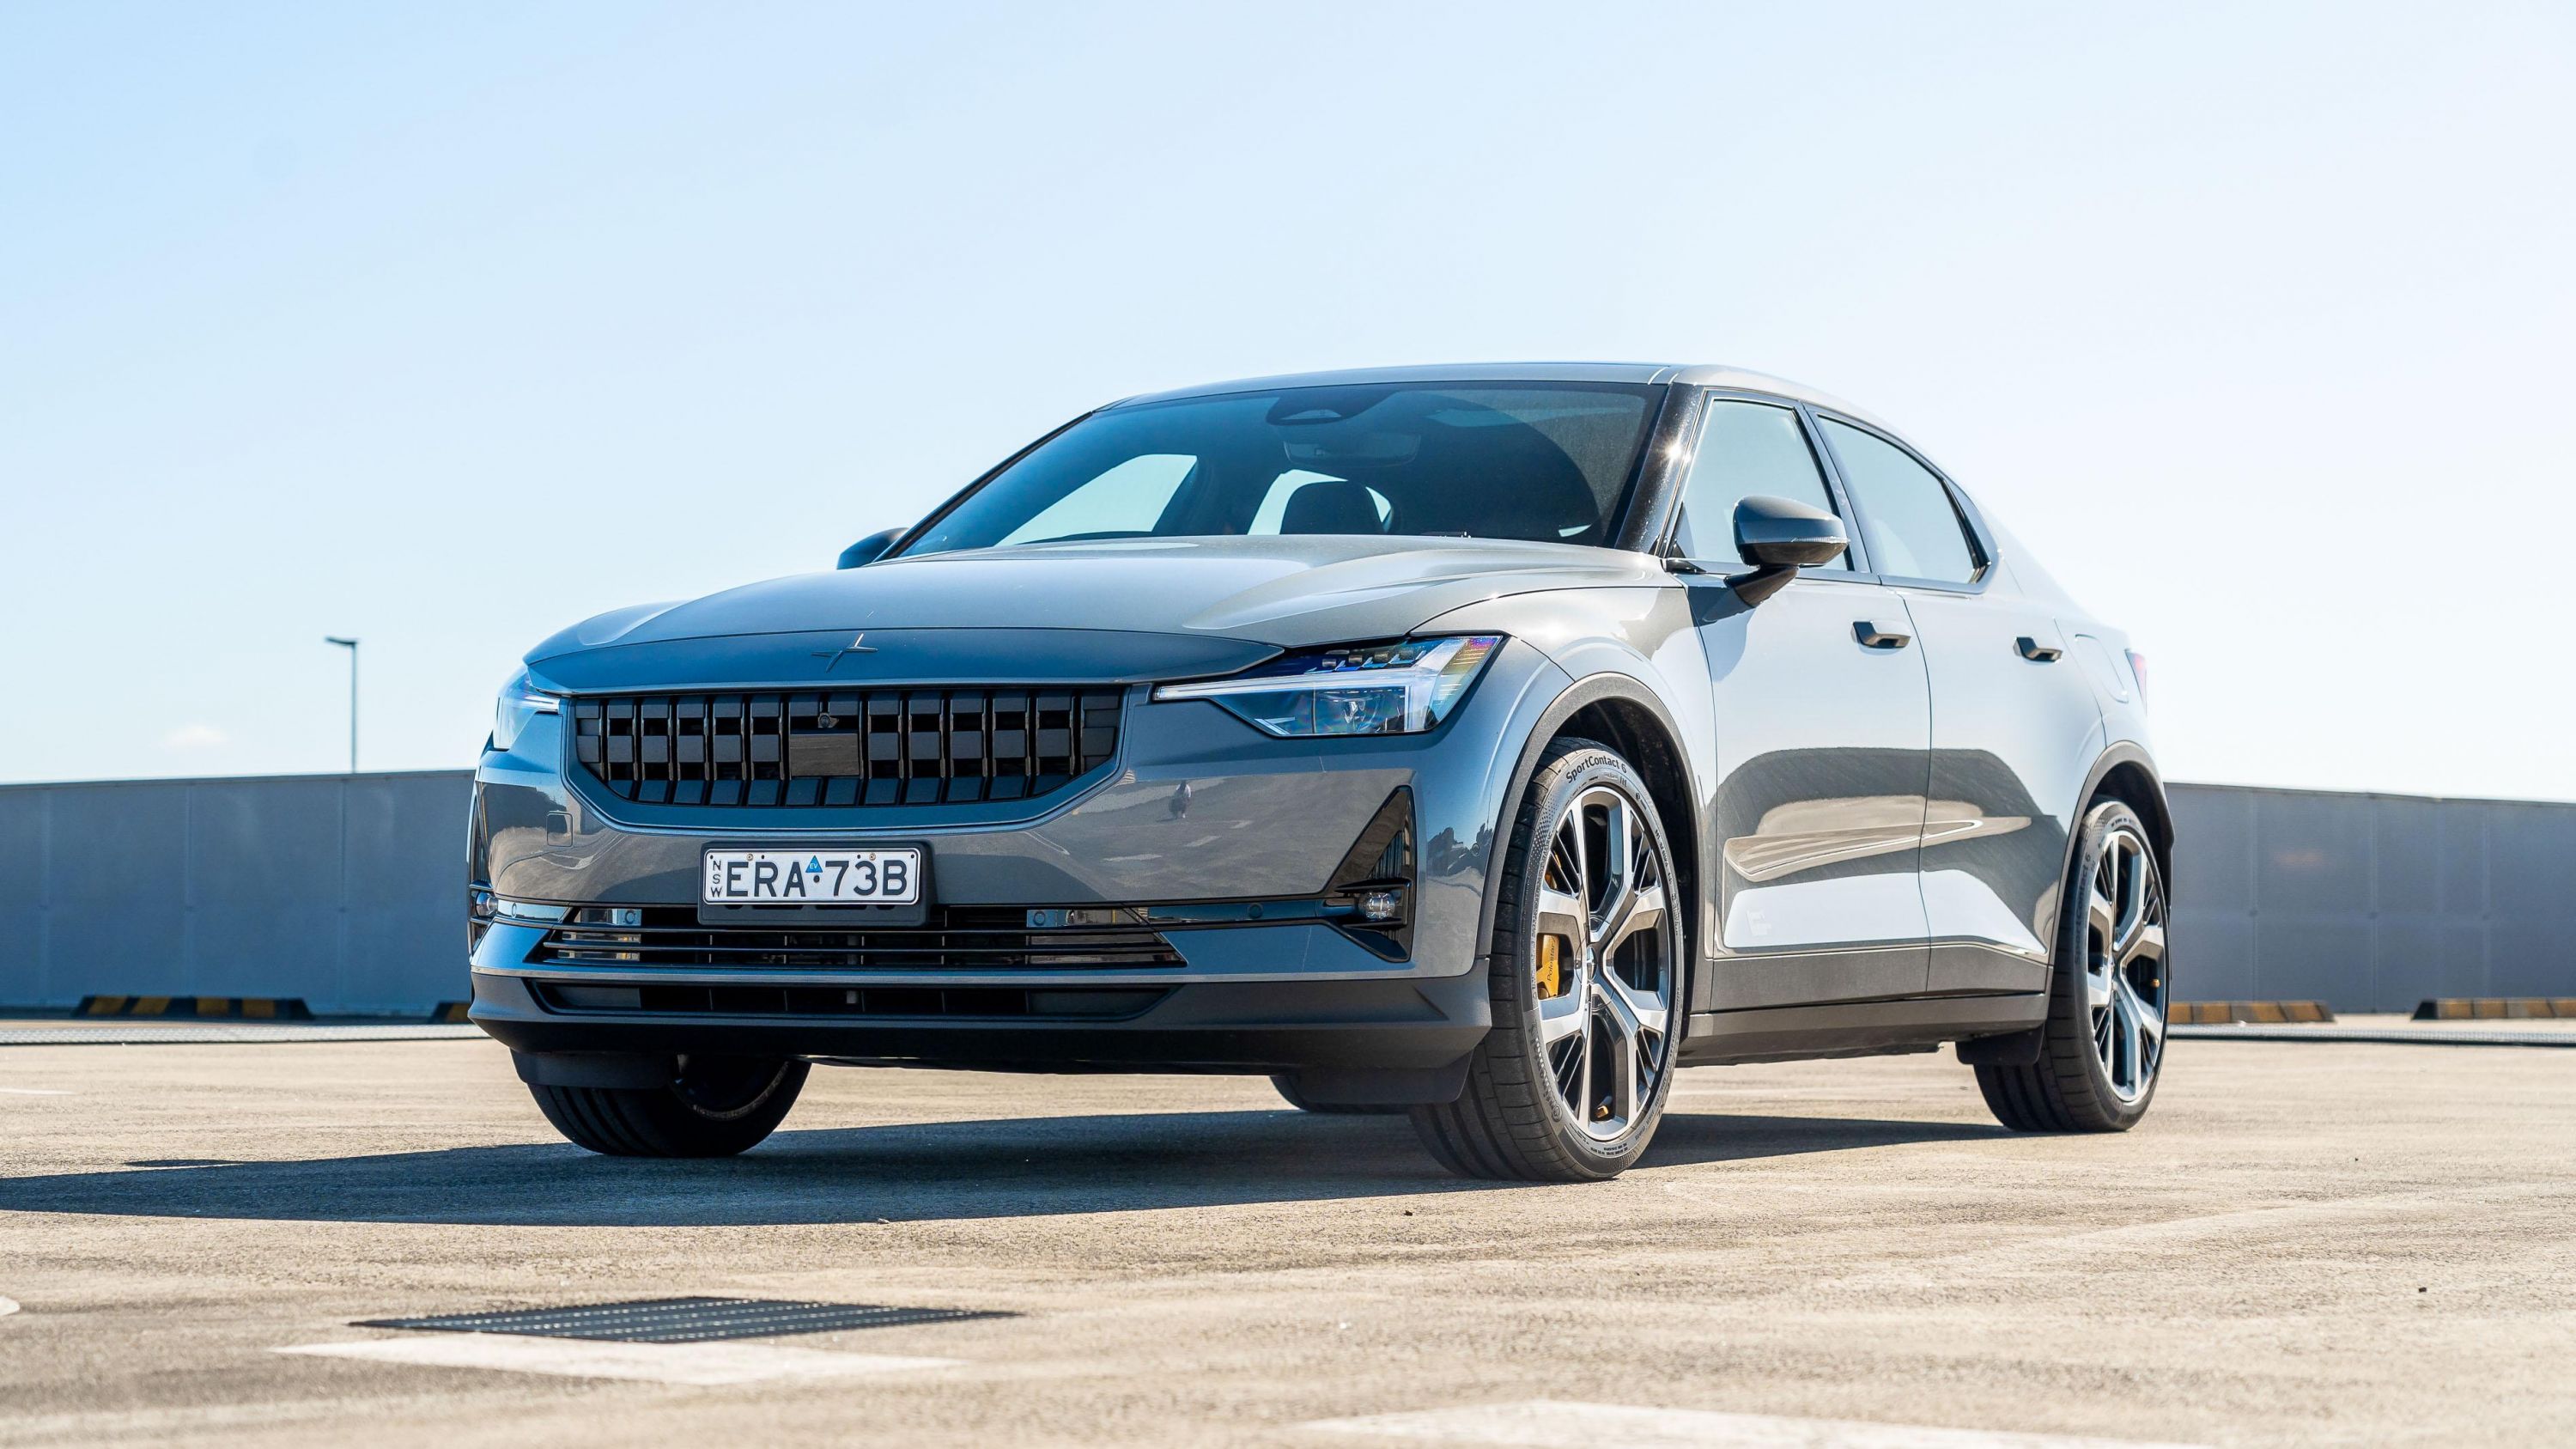 Need For Speed Heat's Hero Car Is A Turned-Up Polestar 1